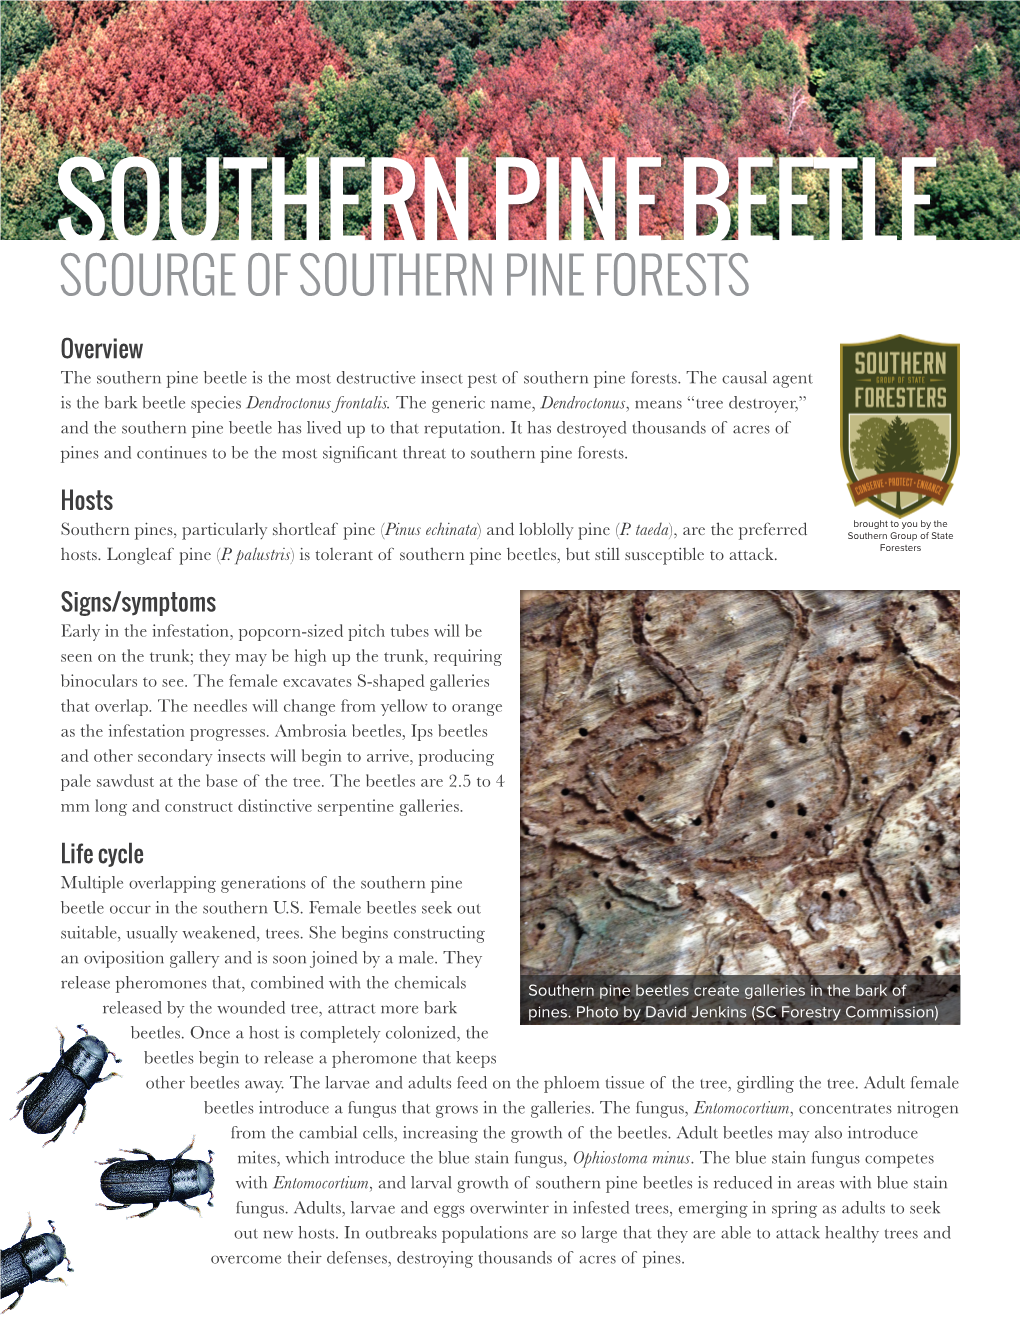 Southern Pine Beetle Scourge of Southern Pine Forests